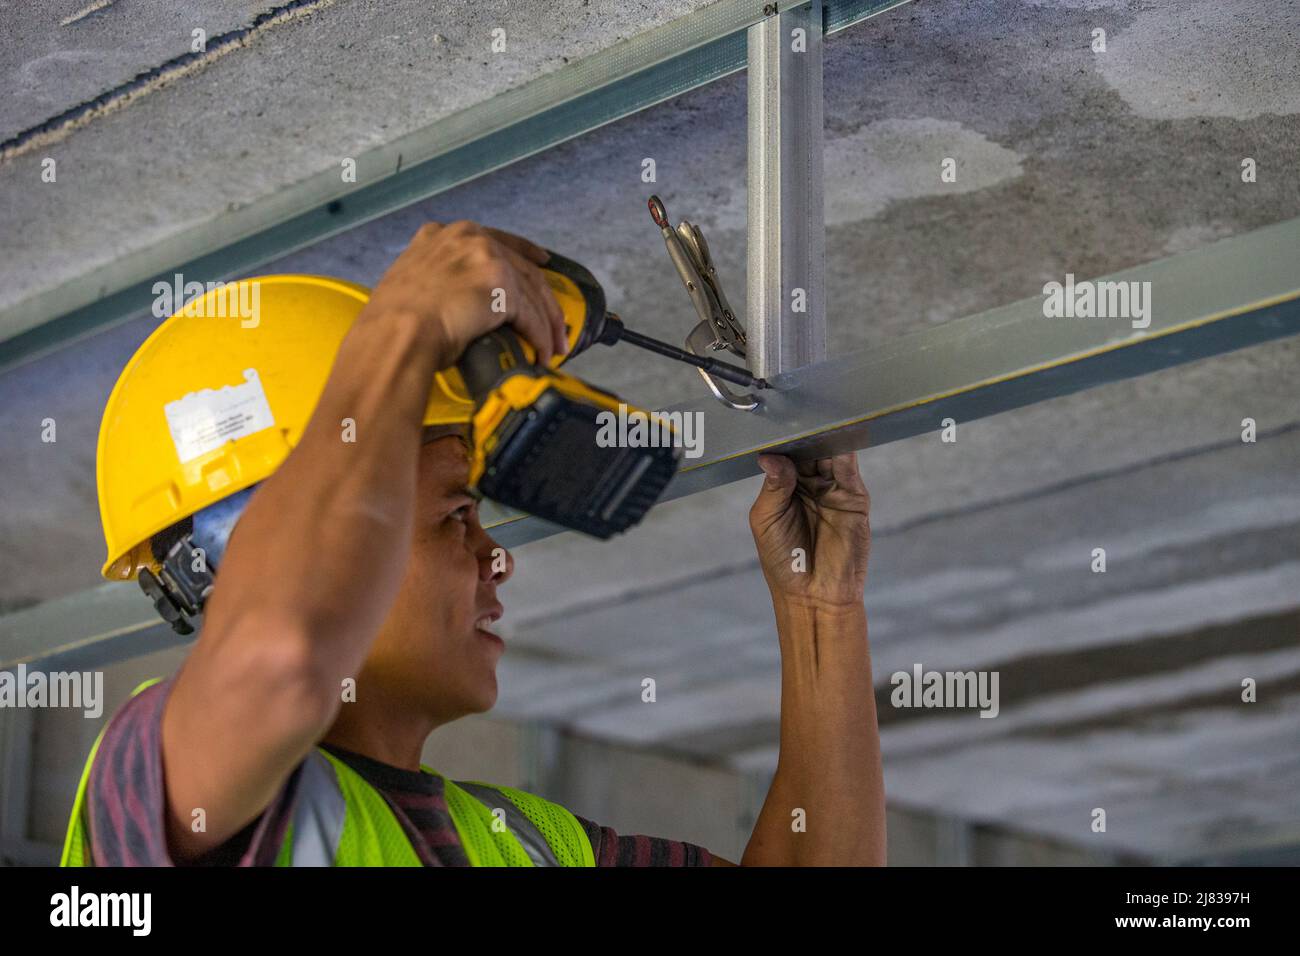 Skilled construction worker using a c-clamp and electric screwdriver to fasten a steel strut to a support strut for a crop down ceiling overhead in a Stock Photo